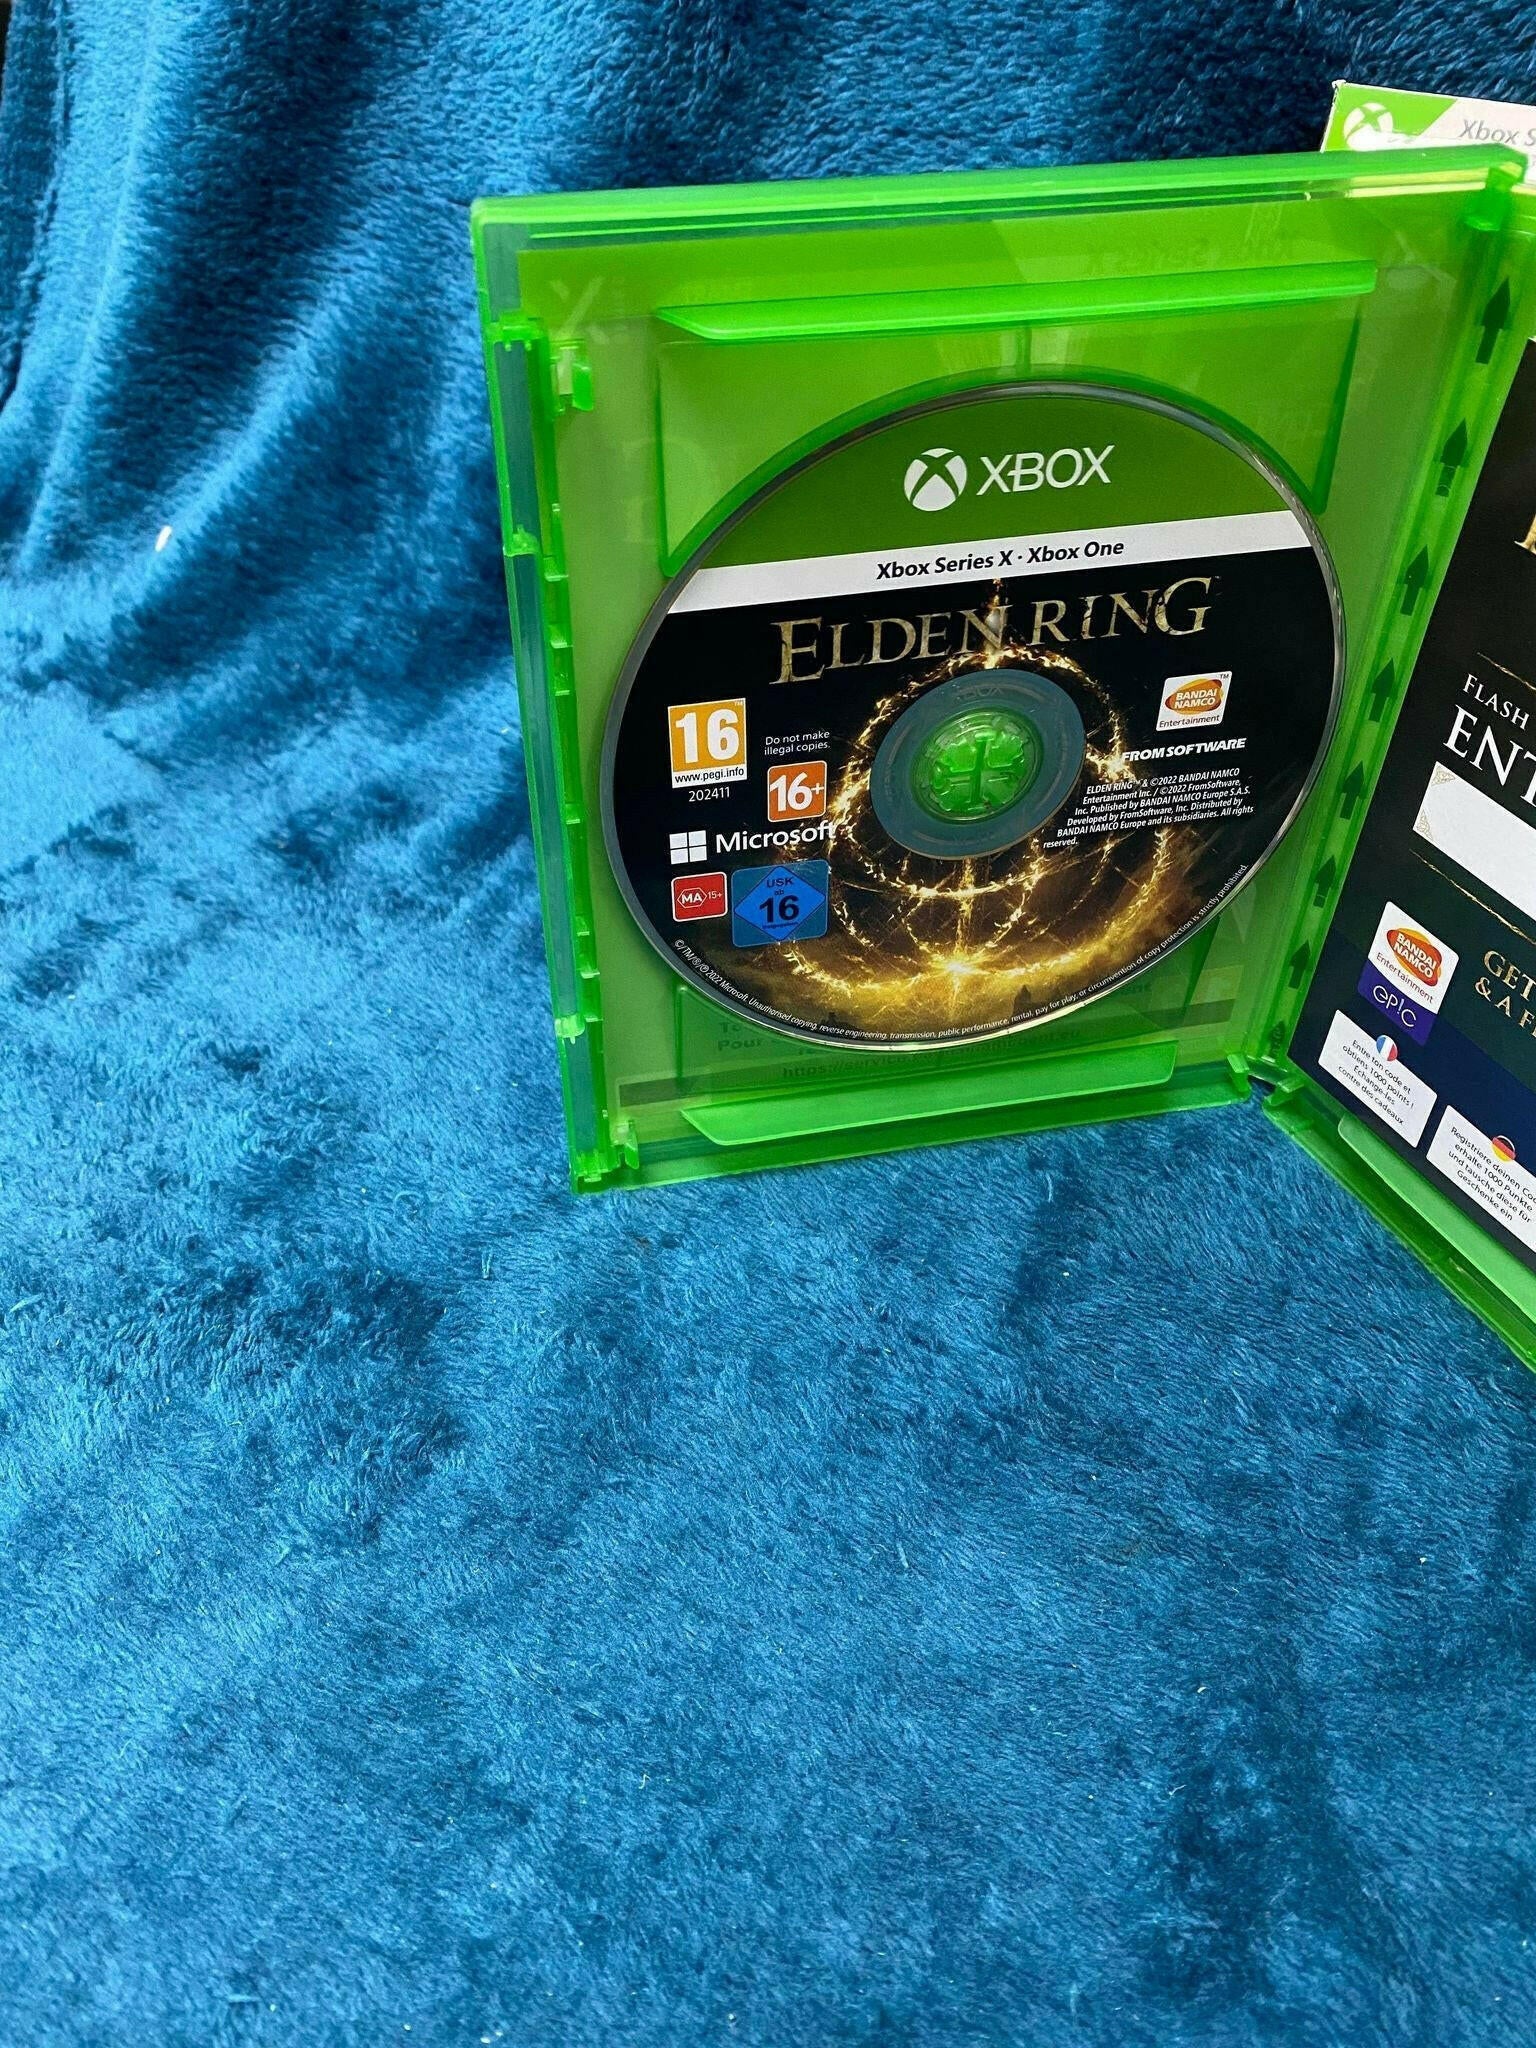 Xbox One Elden Ring Game and accessories